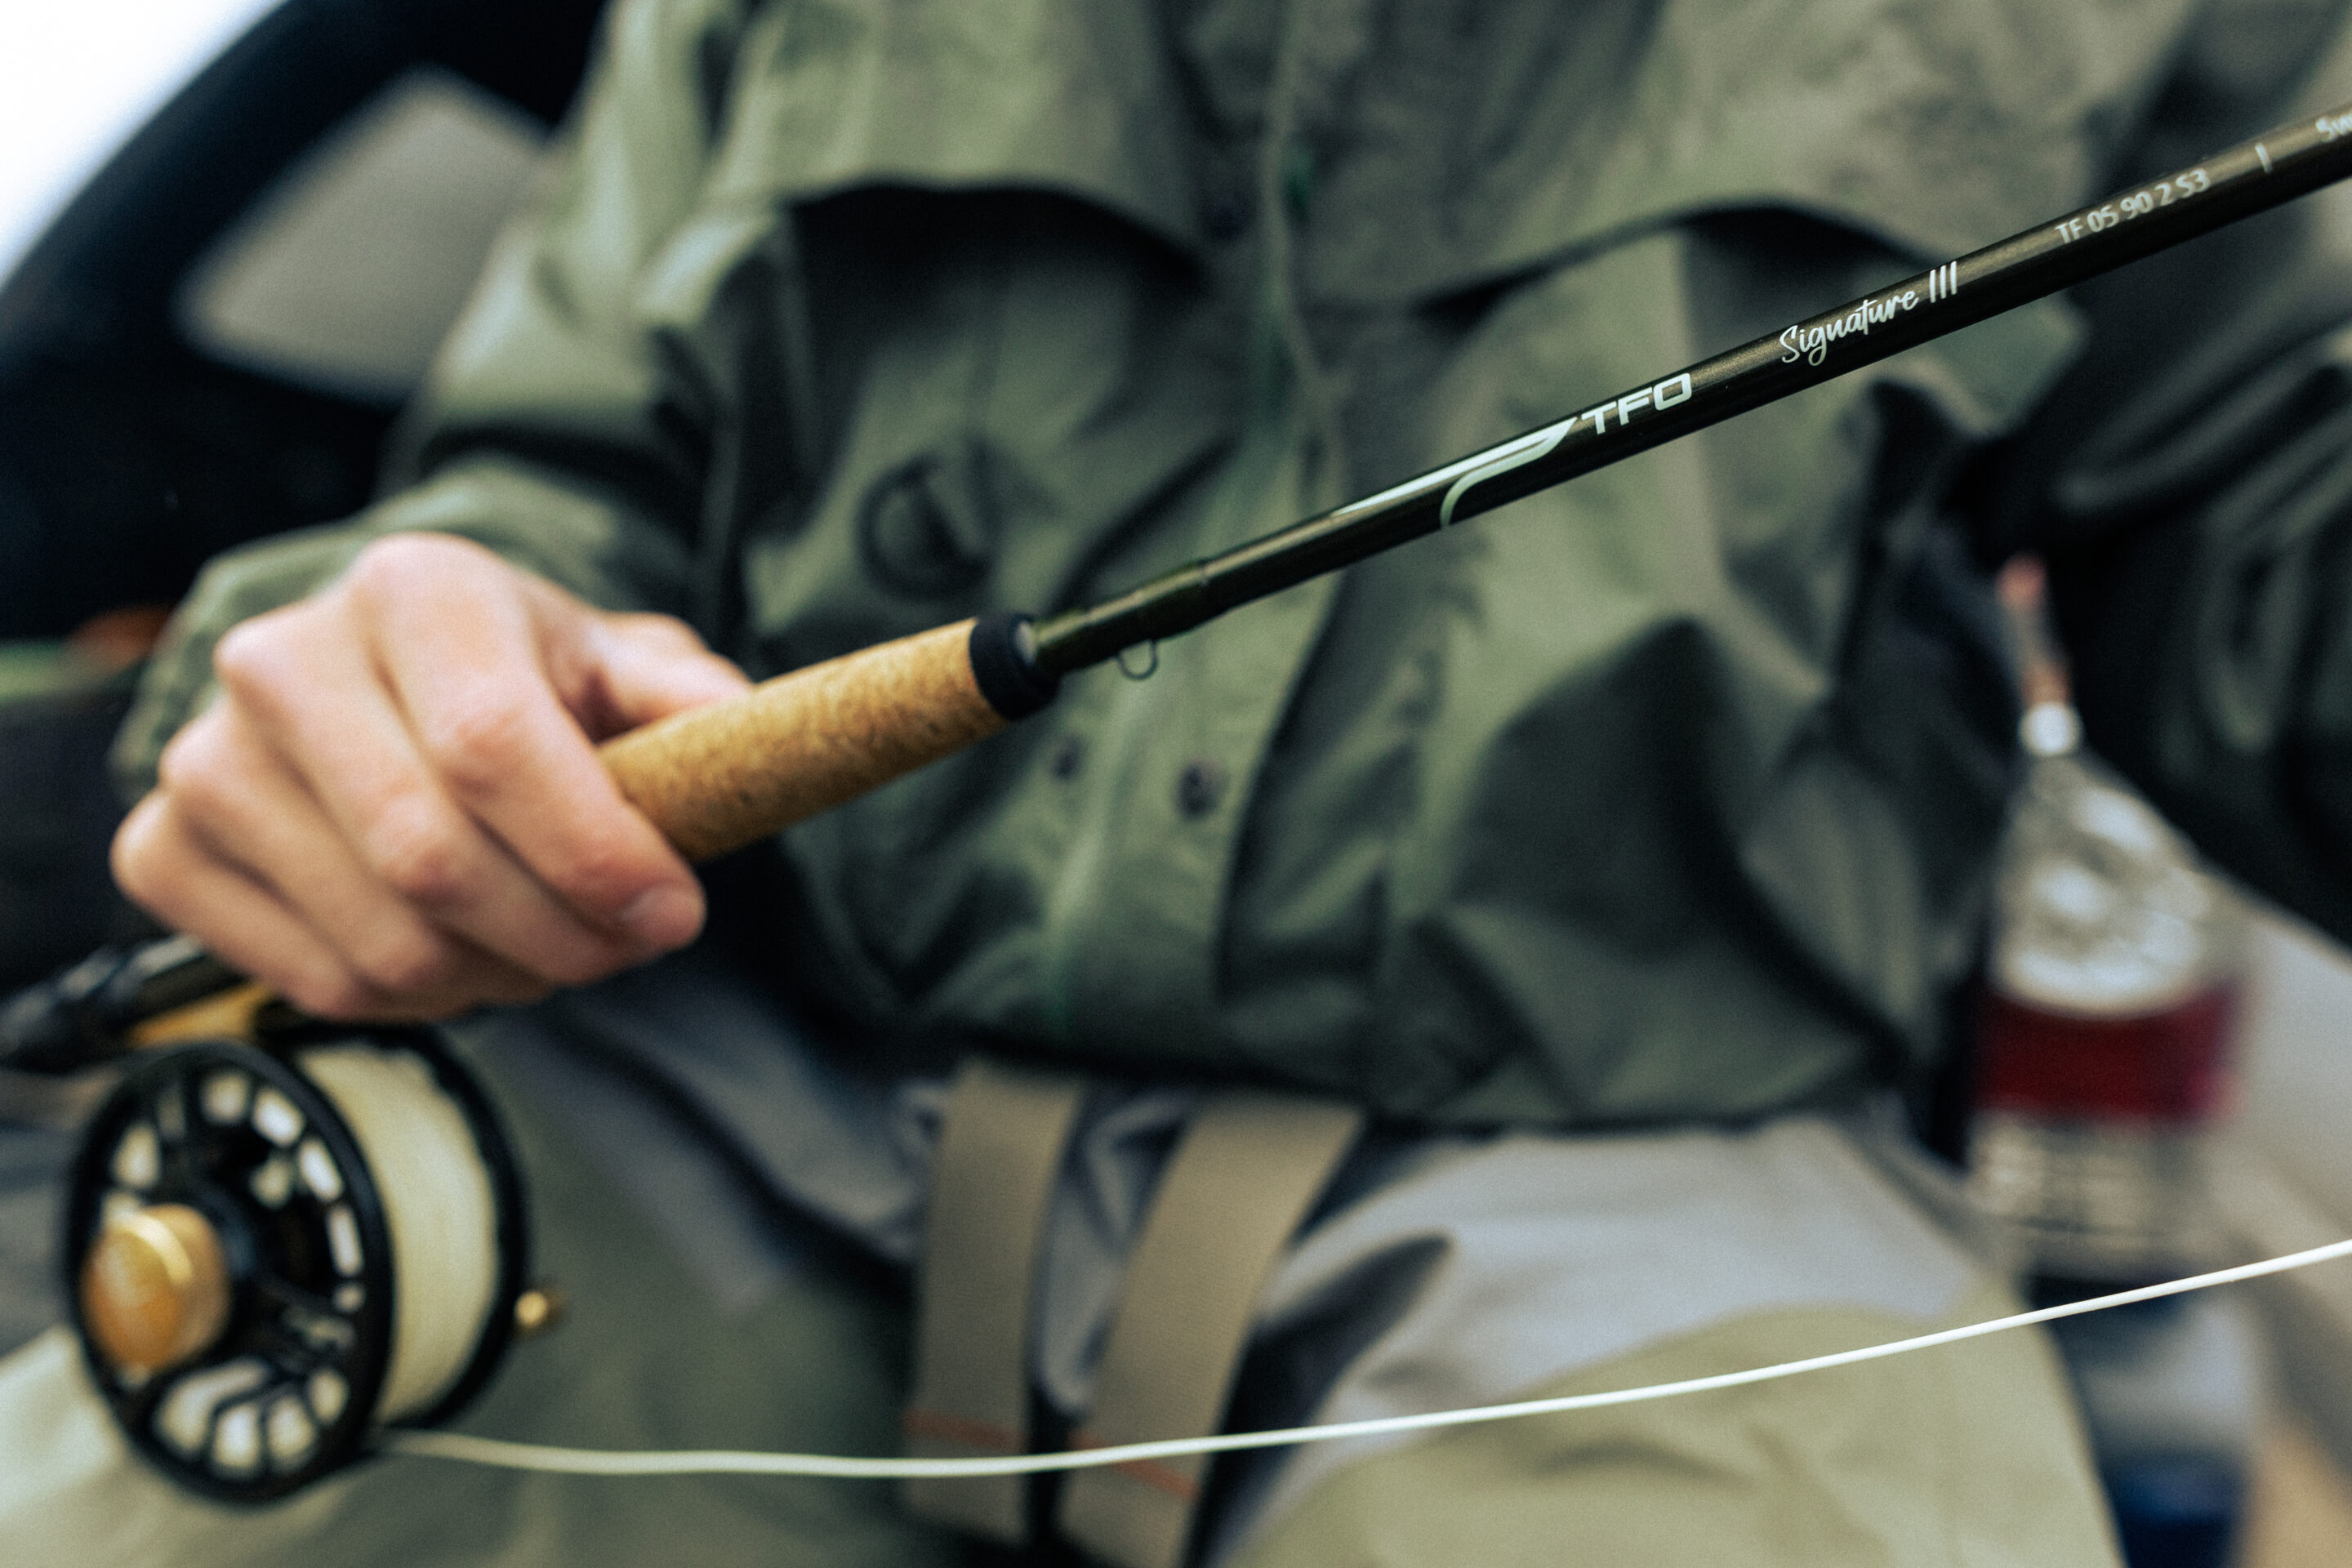 TFO Professional 3 Series Fly Rods  Temple Fork Outfitters – Temple Fork  Outfitters Canada